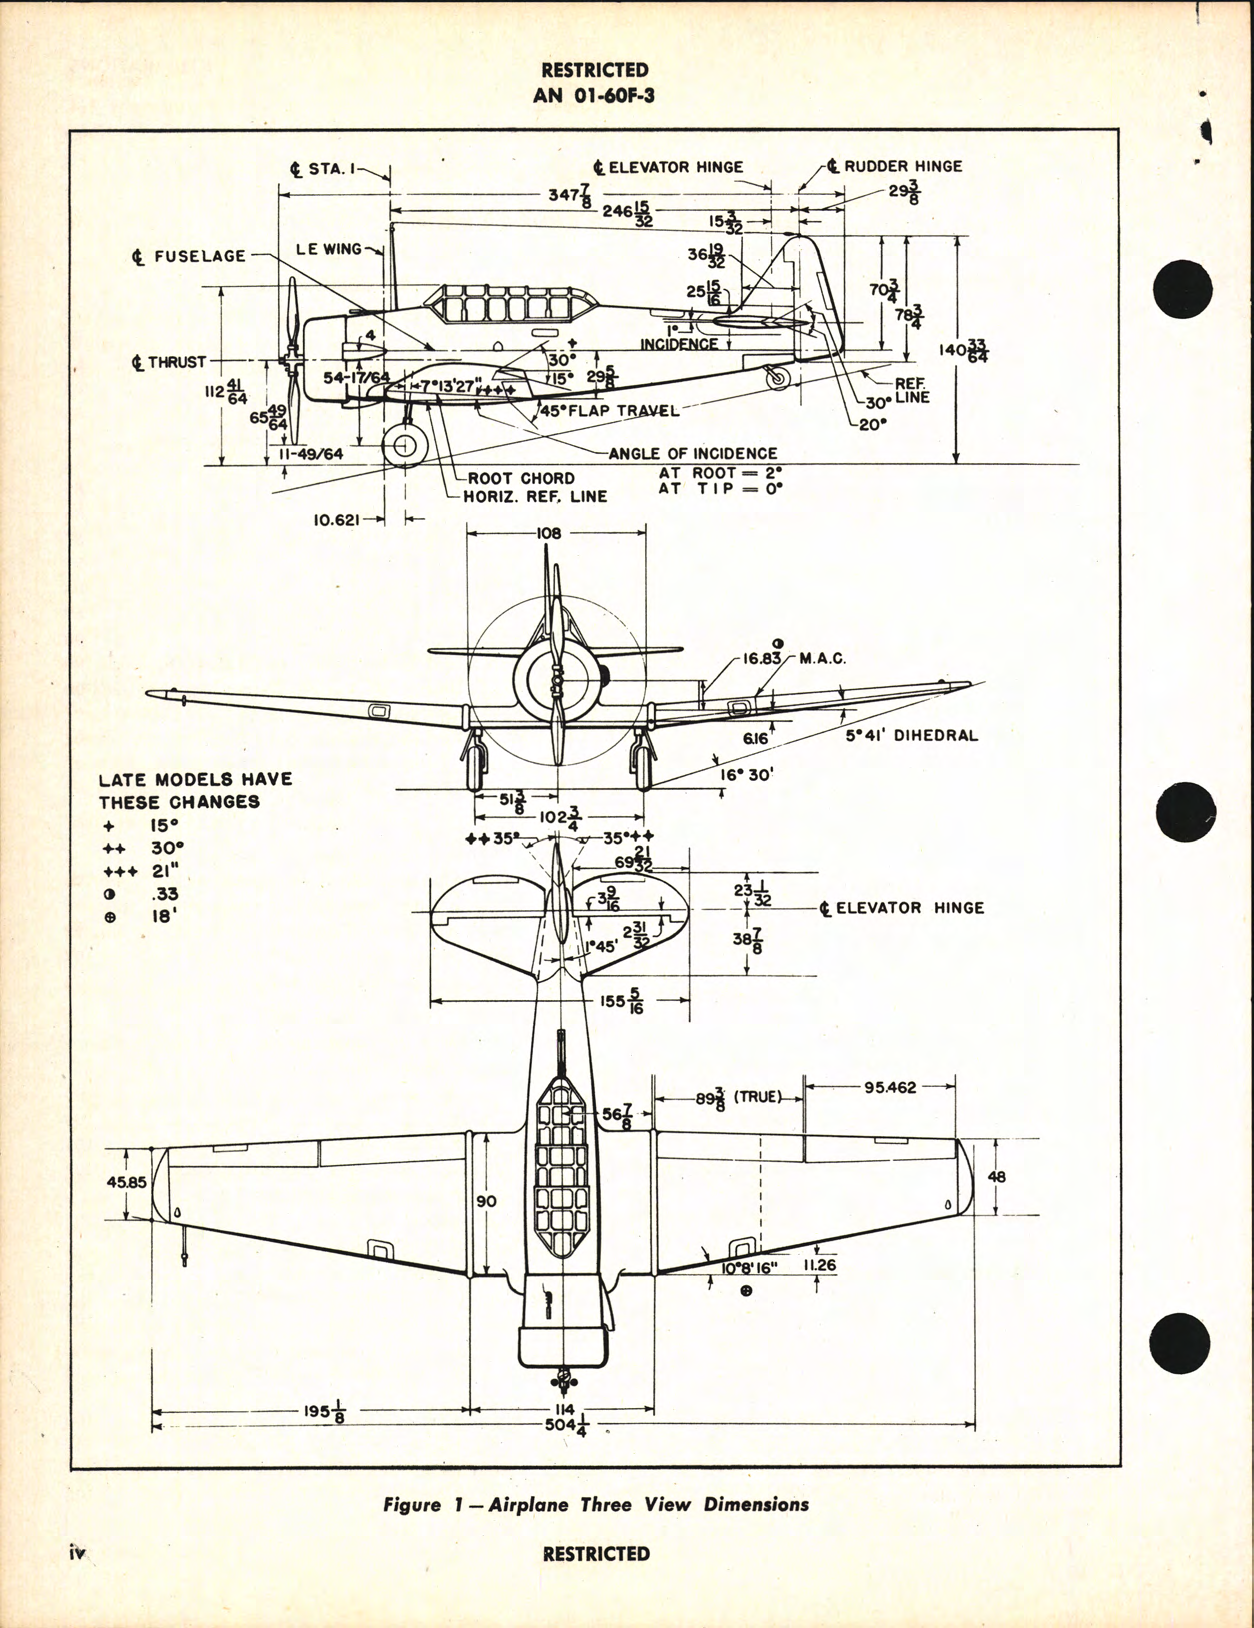 Sample page 6 from AirCorps Library document: Structural Repair Instructions for AT-6 and SNJ Series (Harvard IIA and III)